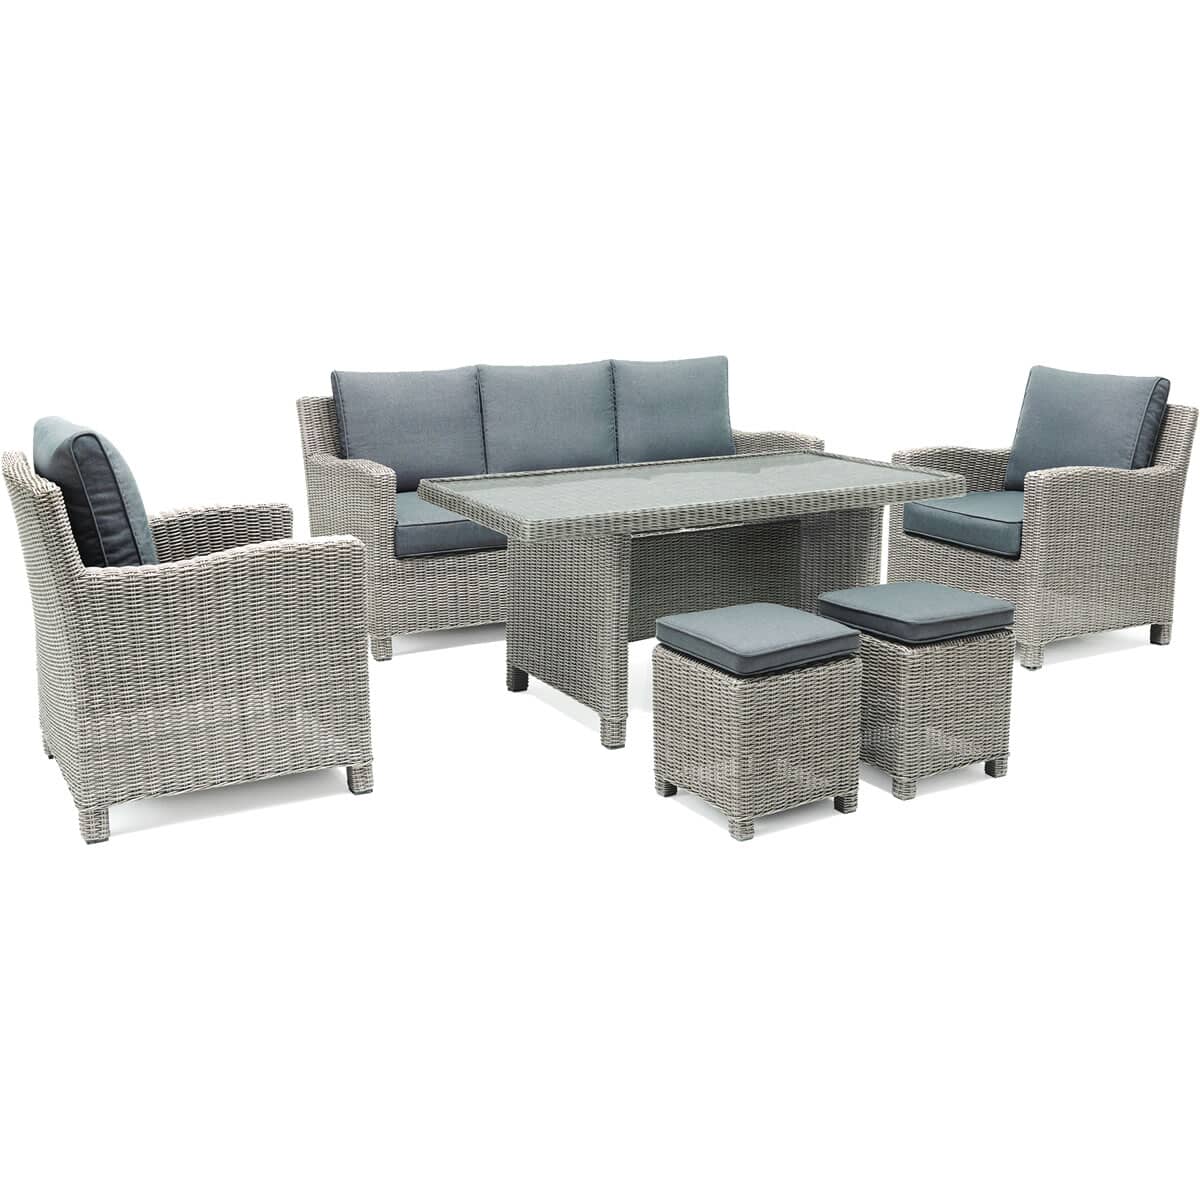 Kettler Palma Sofa Set - White Wash with Glass Top Table